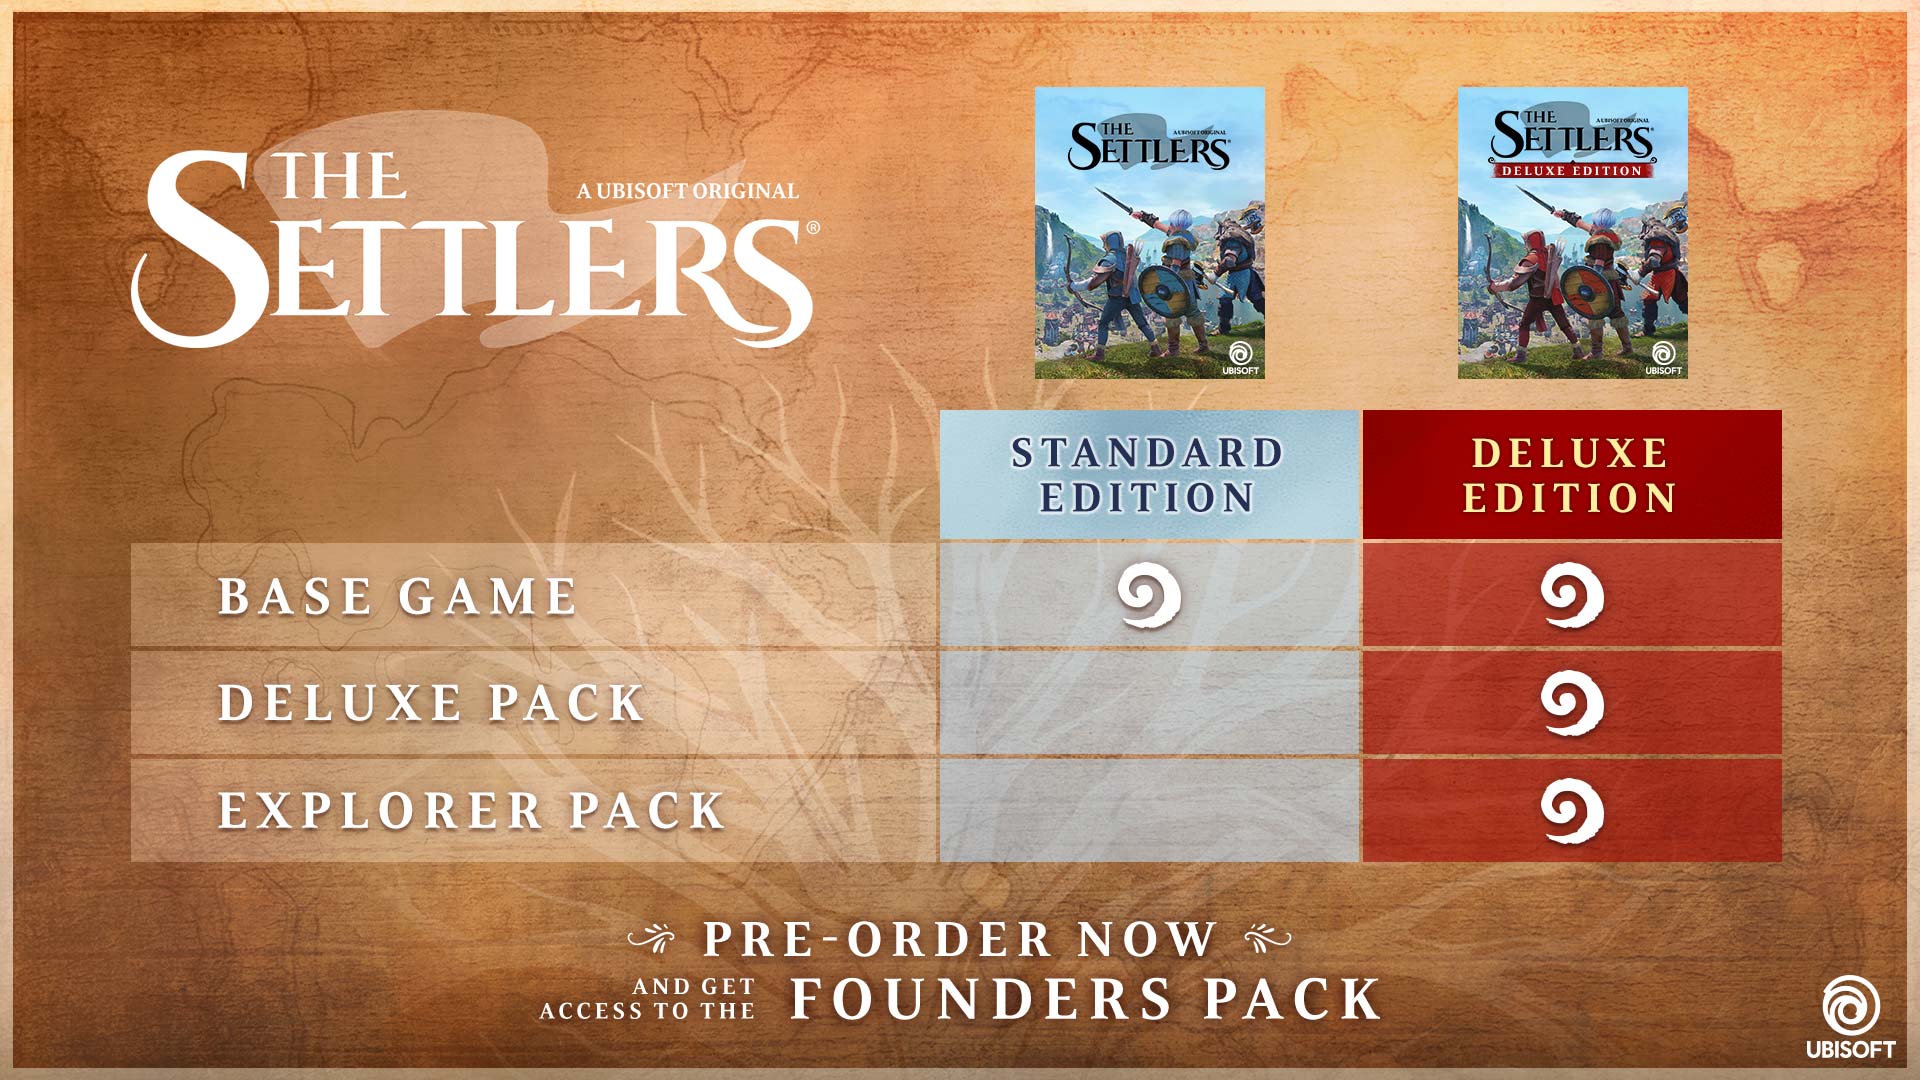 The Settlers - Standard Edition